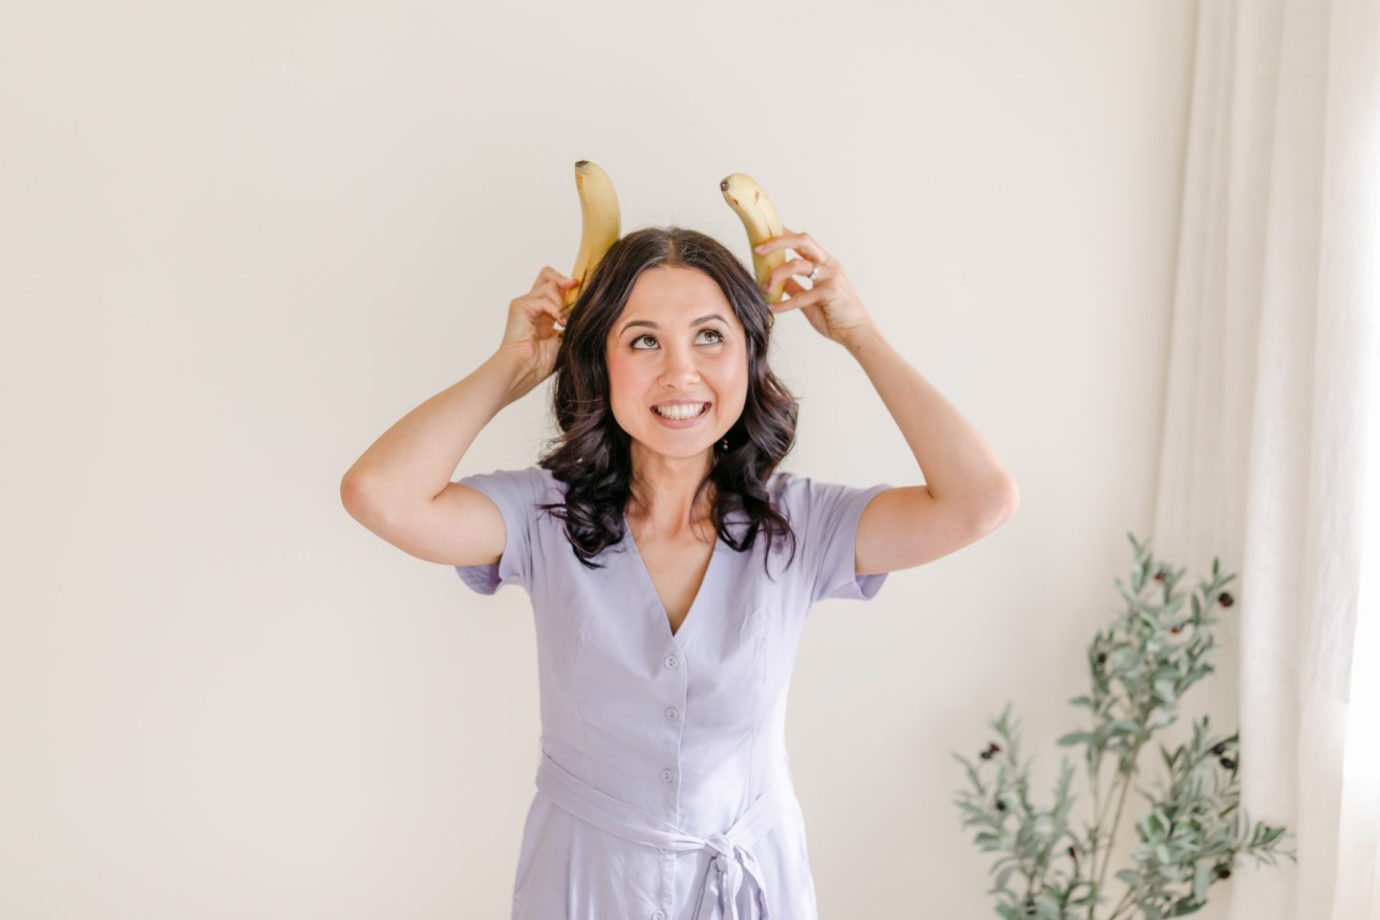 Monique Cormack blogger at Nourish Everyday, wearing a purple dress and holding bananas up to her head, laughing